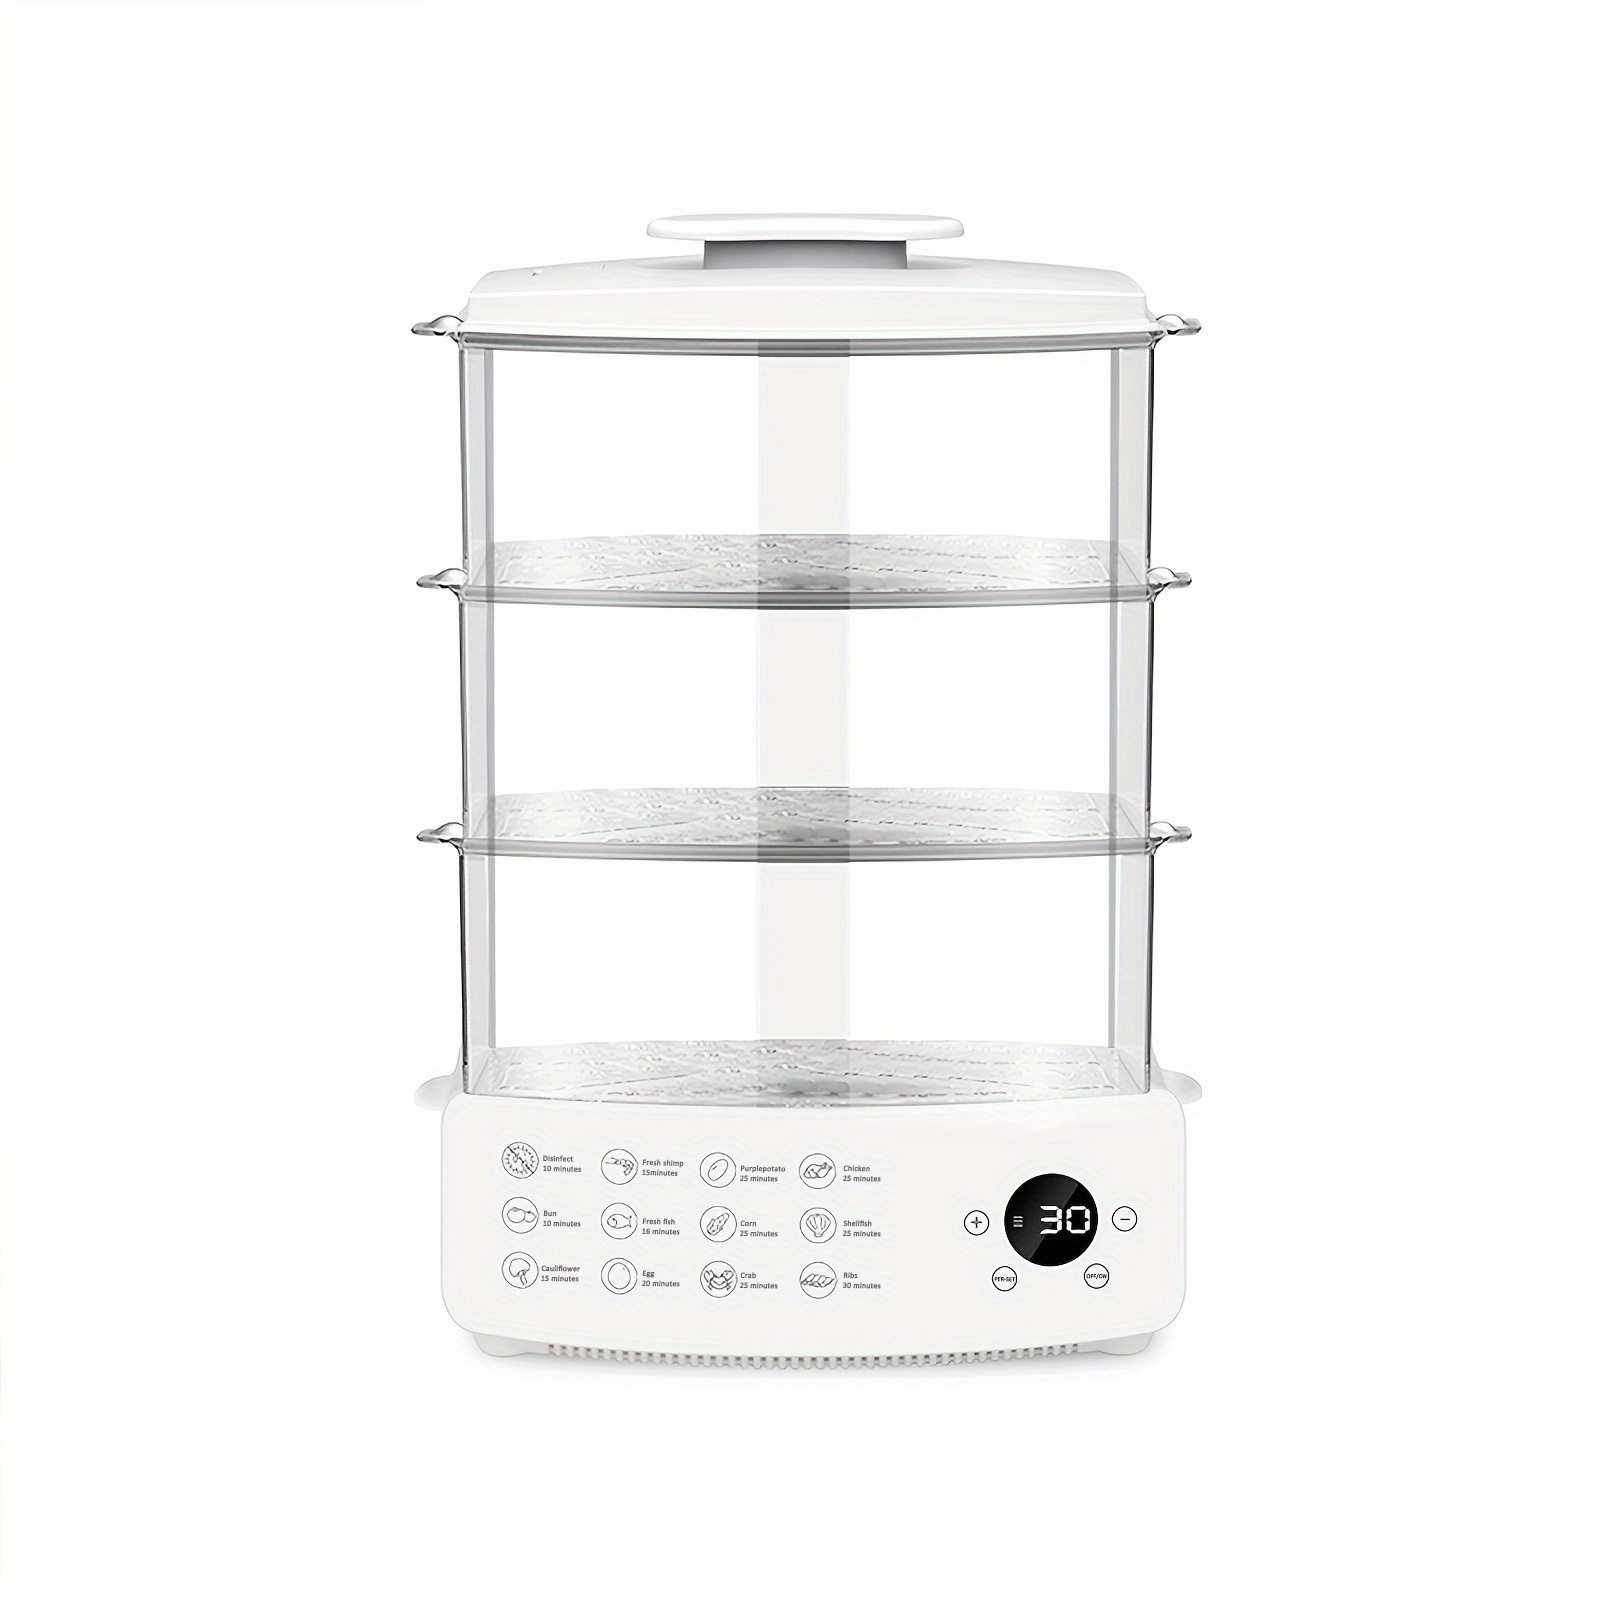 3 tier Electric Food Steamer: Cook Multiple Dishes - Temu